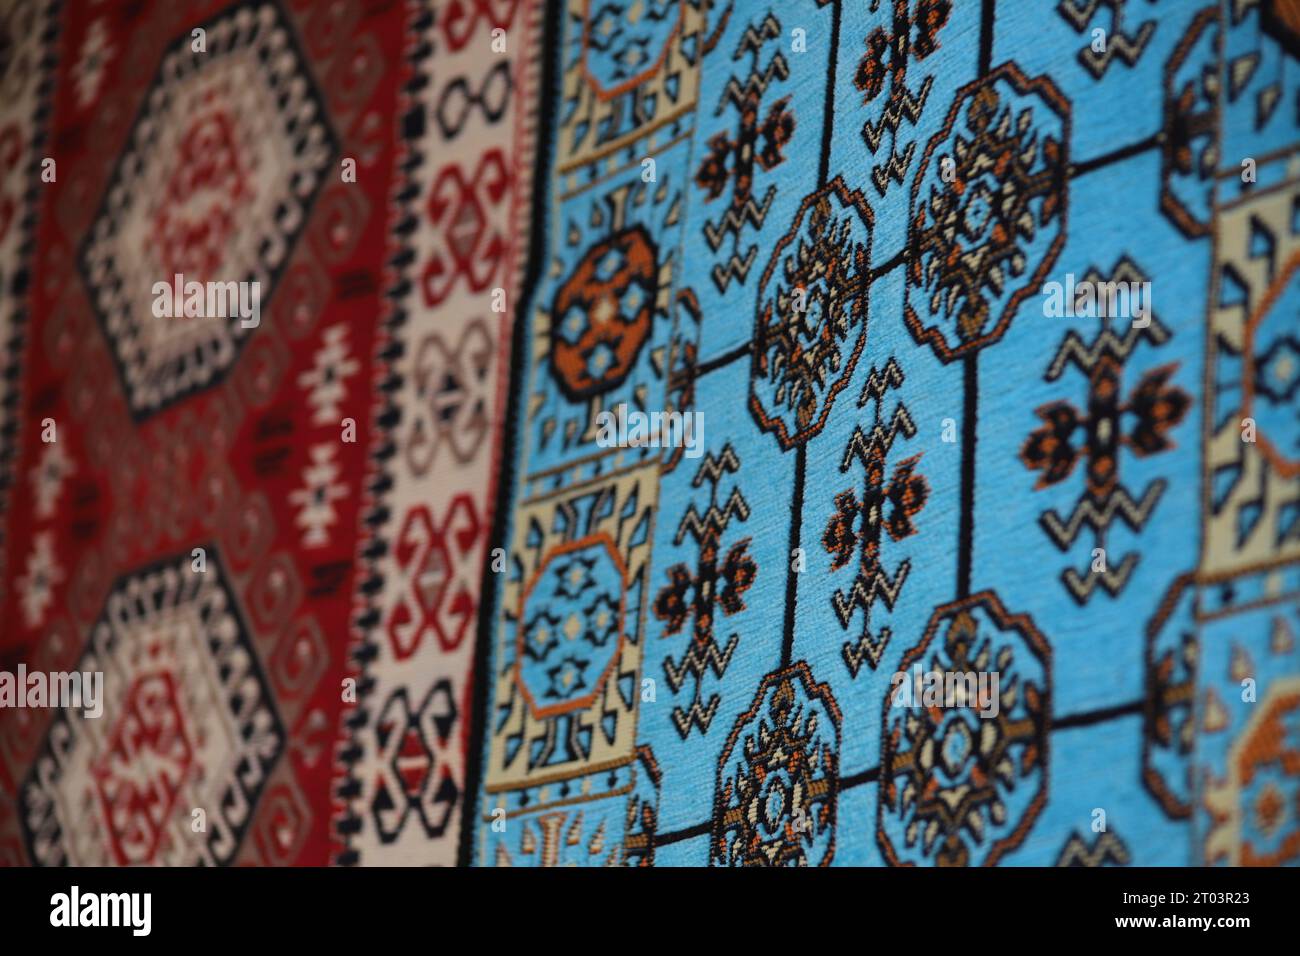 Two Beautiful, ethnic patterned Woven Rugs, one Blue and one Red, hang on a Wall being displayed in the Streets of Gjirokaster Baazar in Albania. Stock Photo